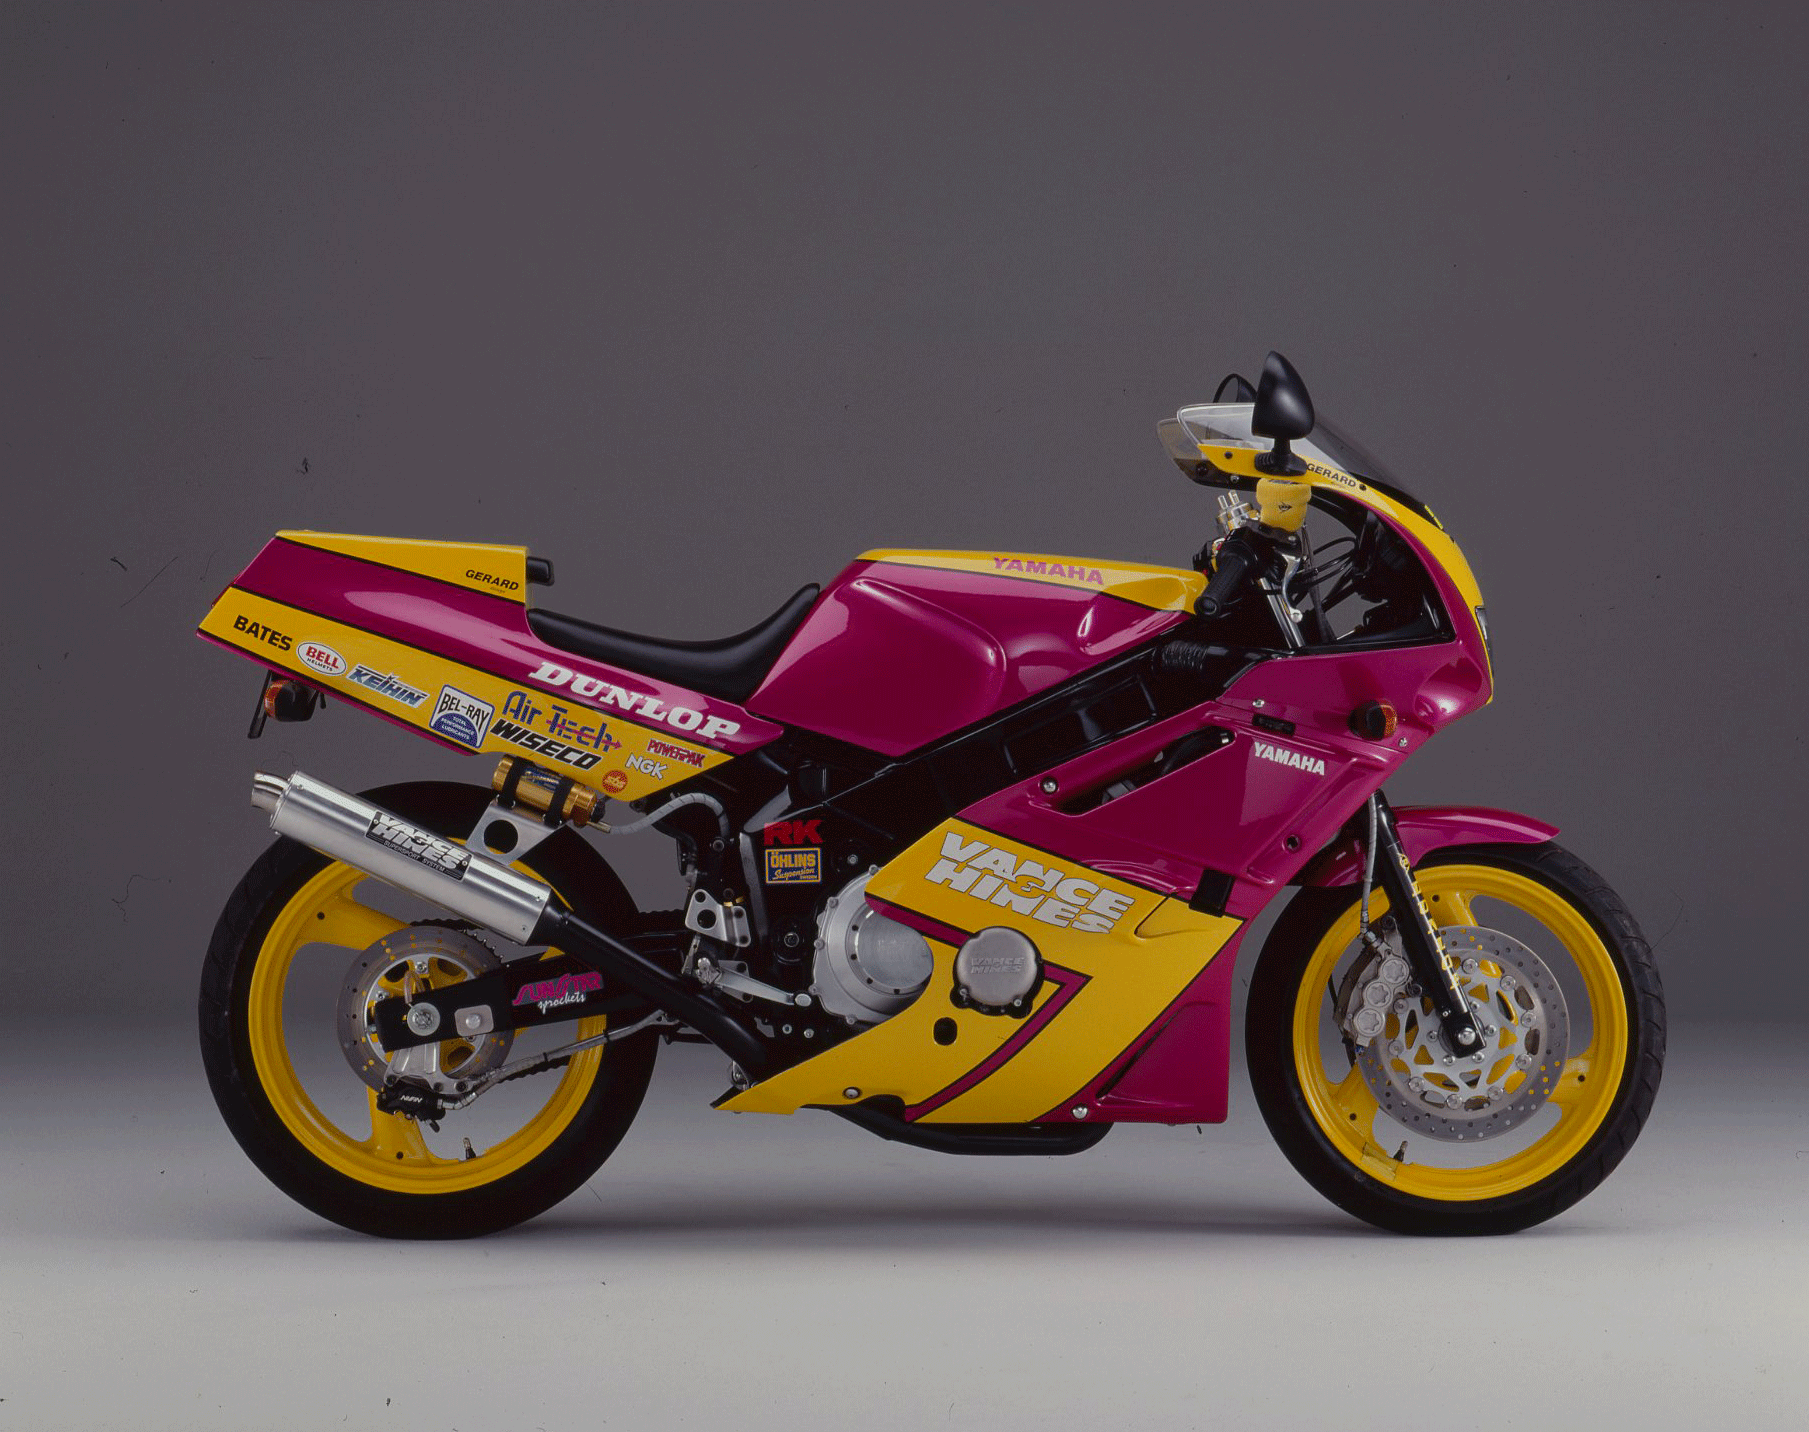 This Vance and Hines-modified Yamaha FZR600 was painted to resemble the teams’ early ’90s racebikes.”